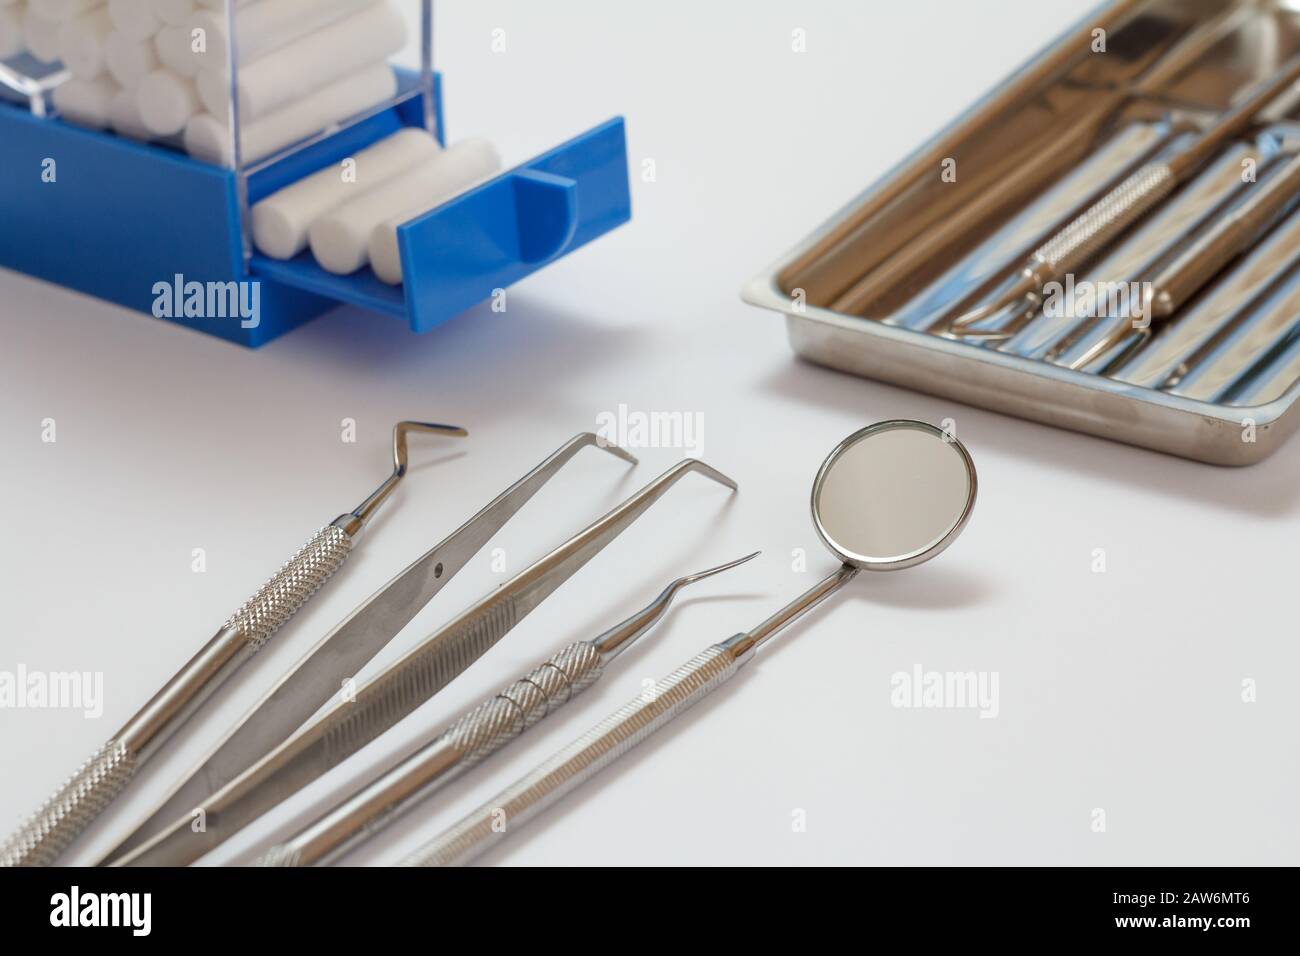 Set of metal dental instruments for dental treatment on white background. Medical tools, stainless steel tray and cotton tampons holder. Close-up view Stock Photo